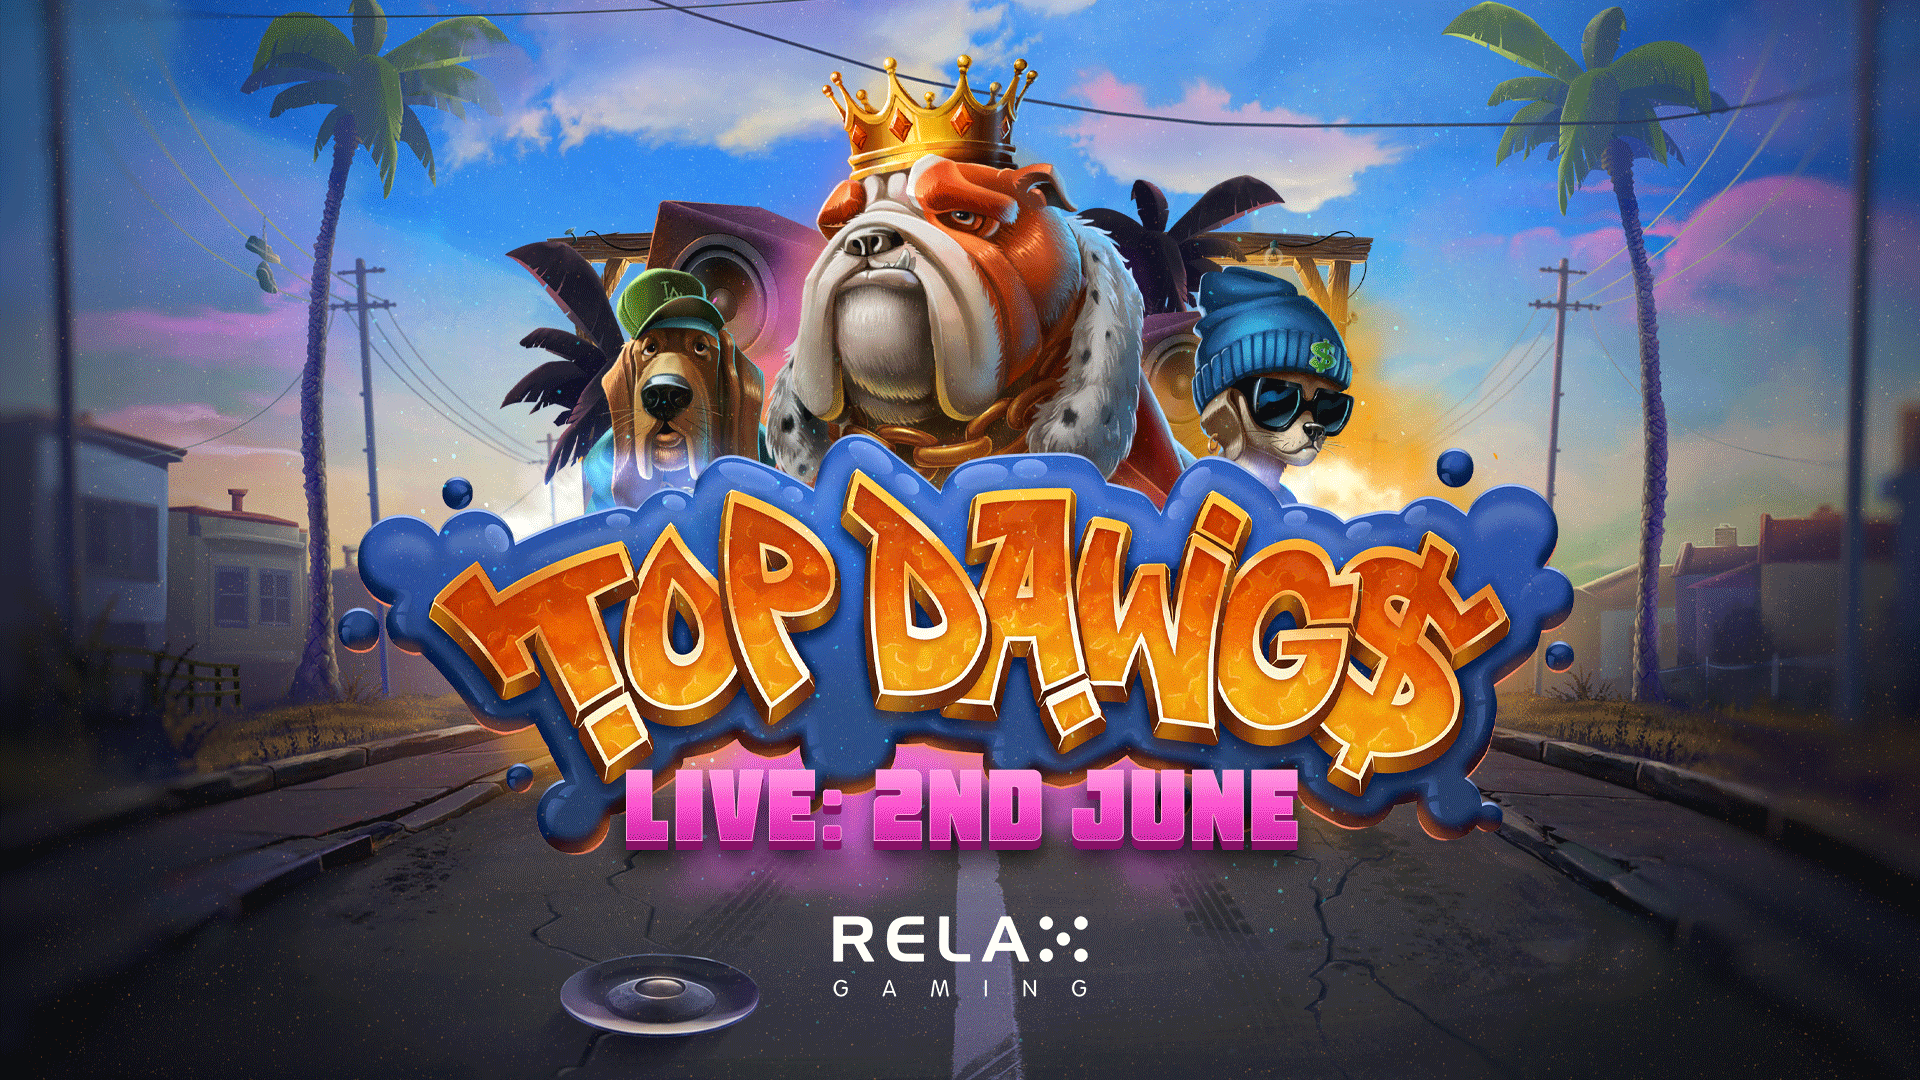 Relax Gaming hits the streets with Top Dawg$